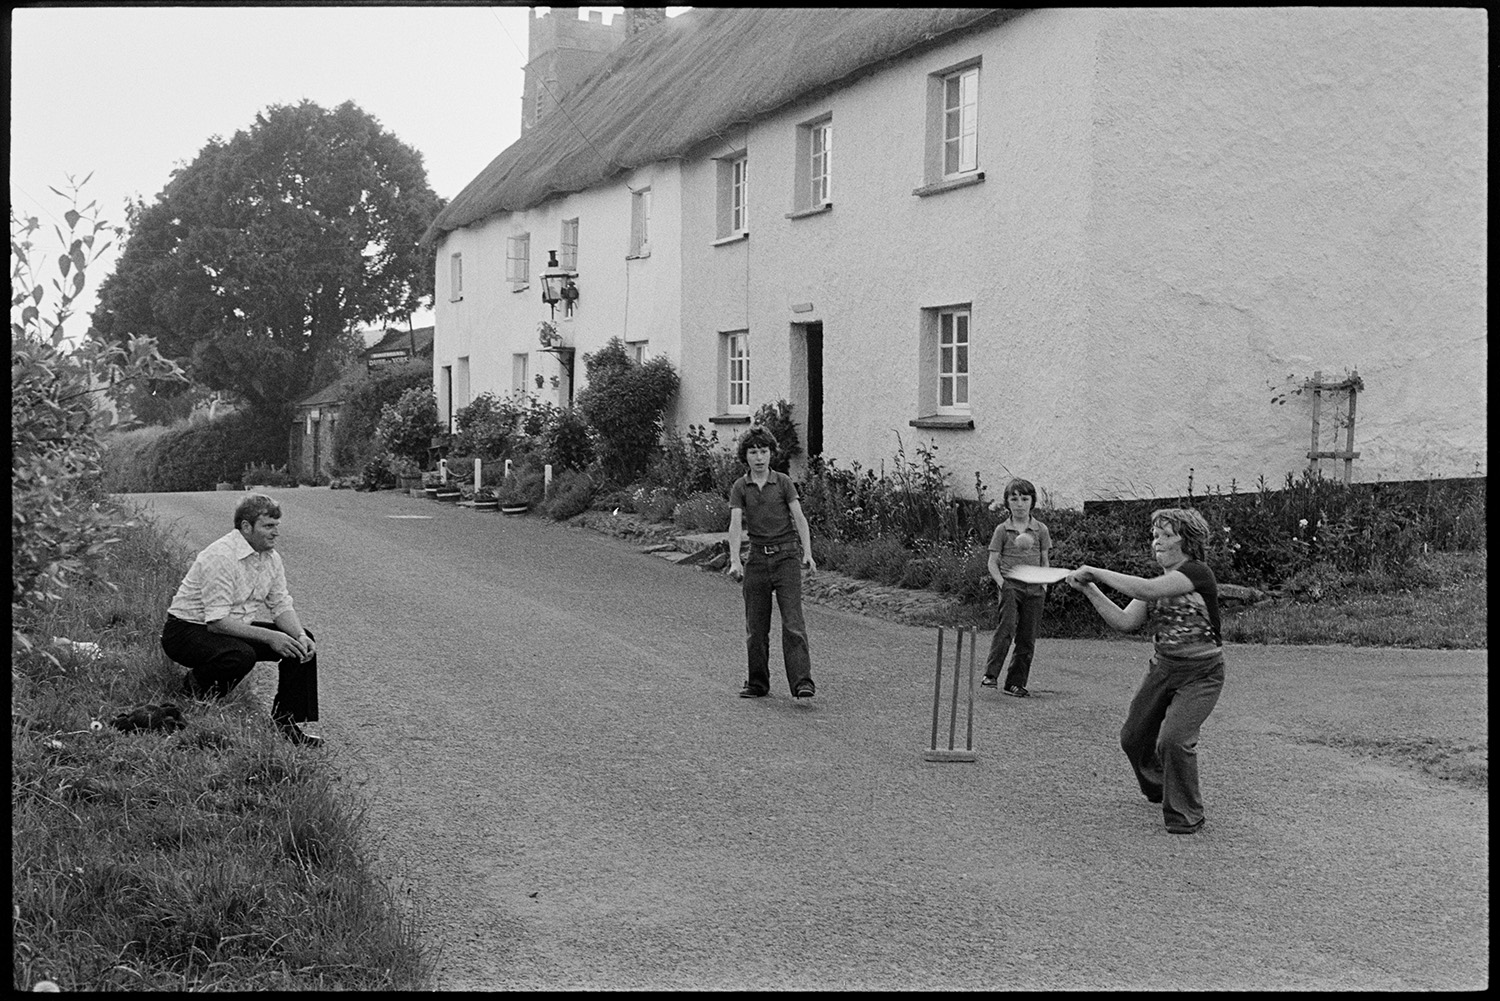 Children playing cricket in street. 
[A man watching three boys playing cricket in a street in Iddesleigh. One boy is about to hit the ball. Thatched cottages are visible in the background.]